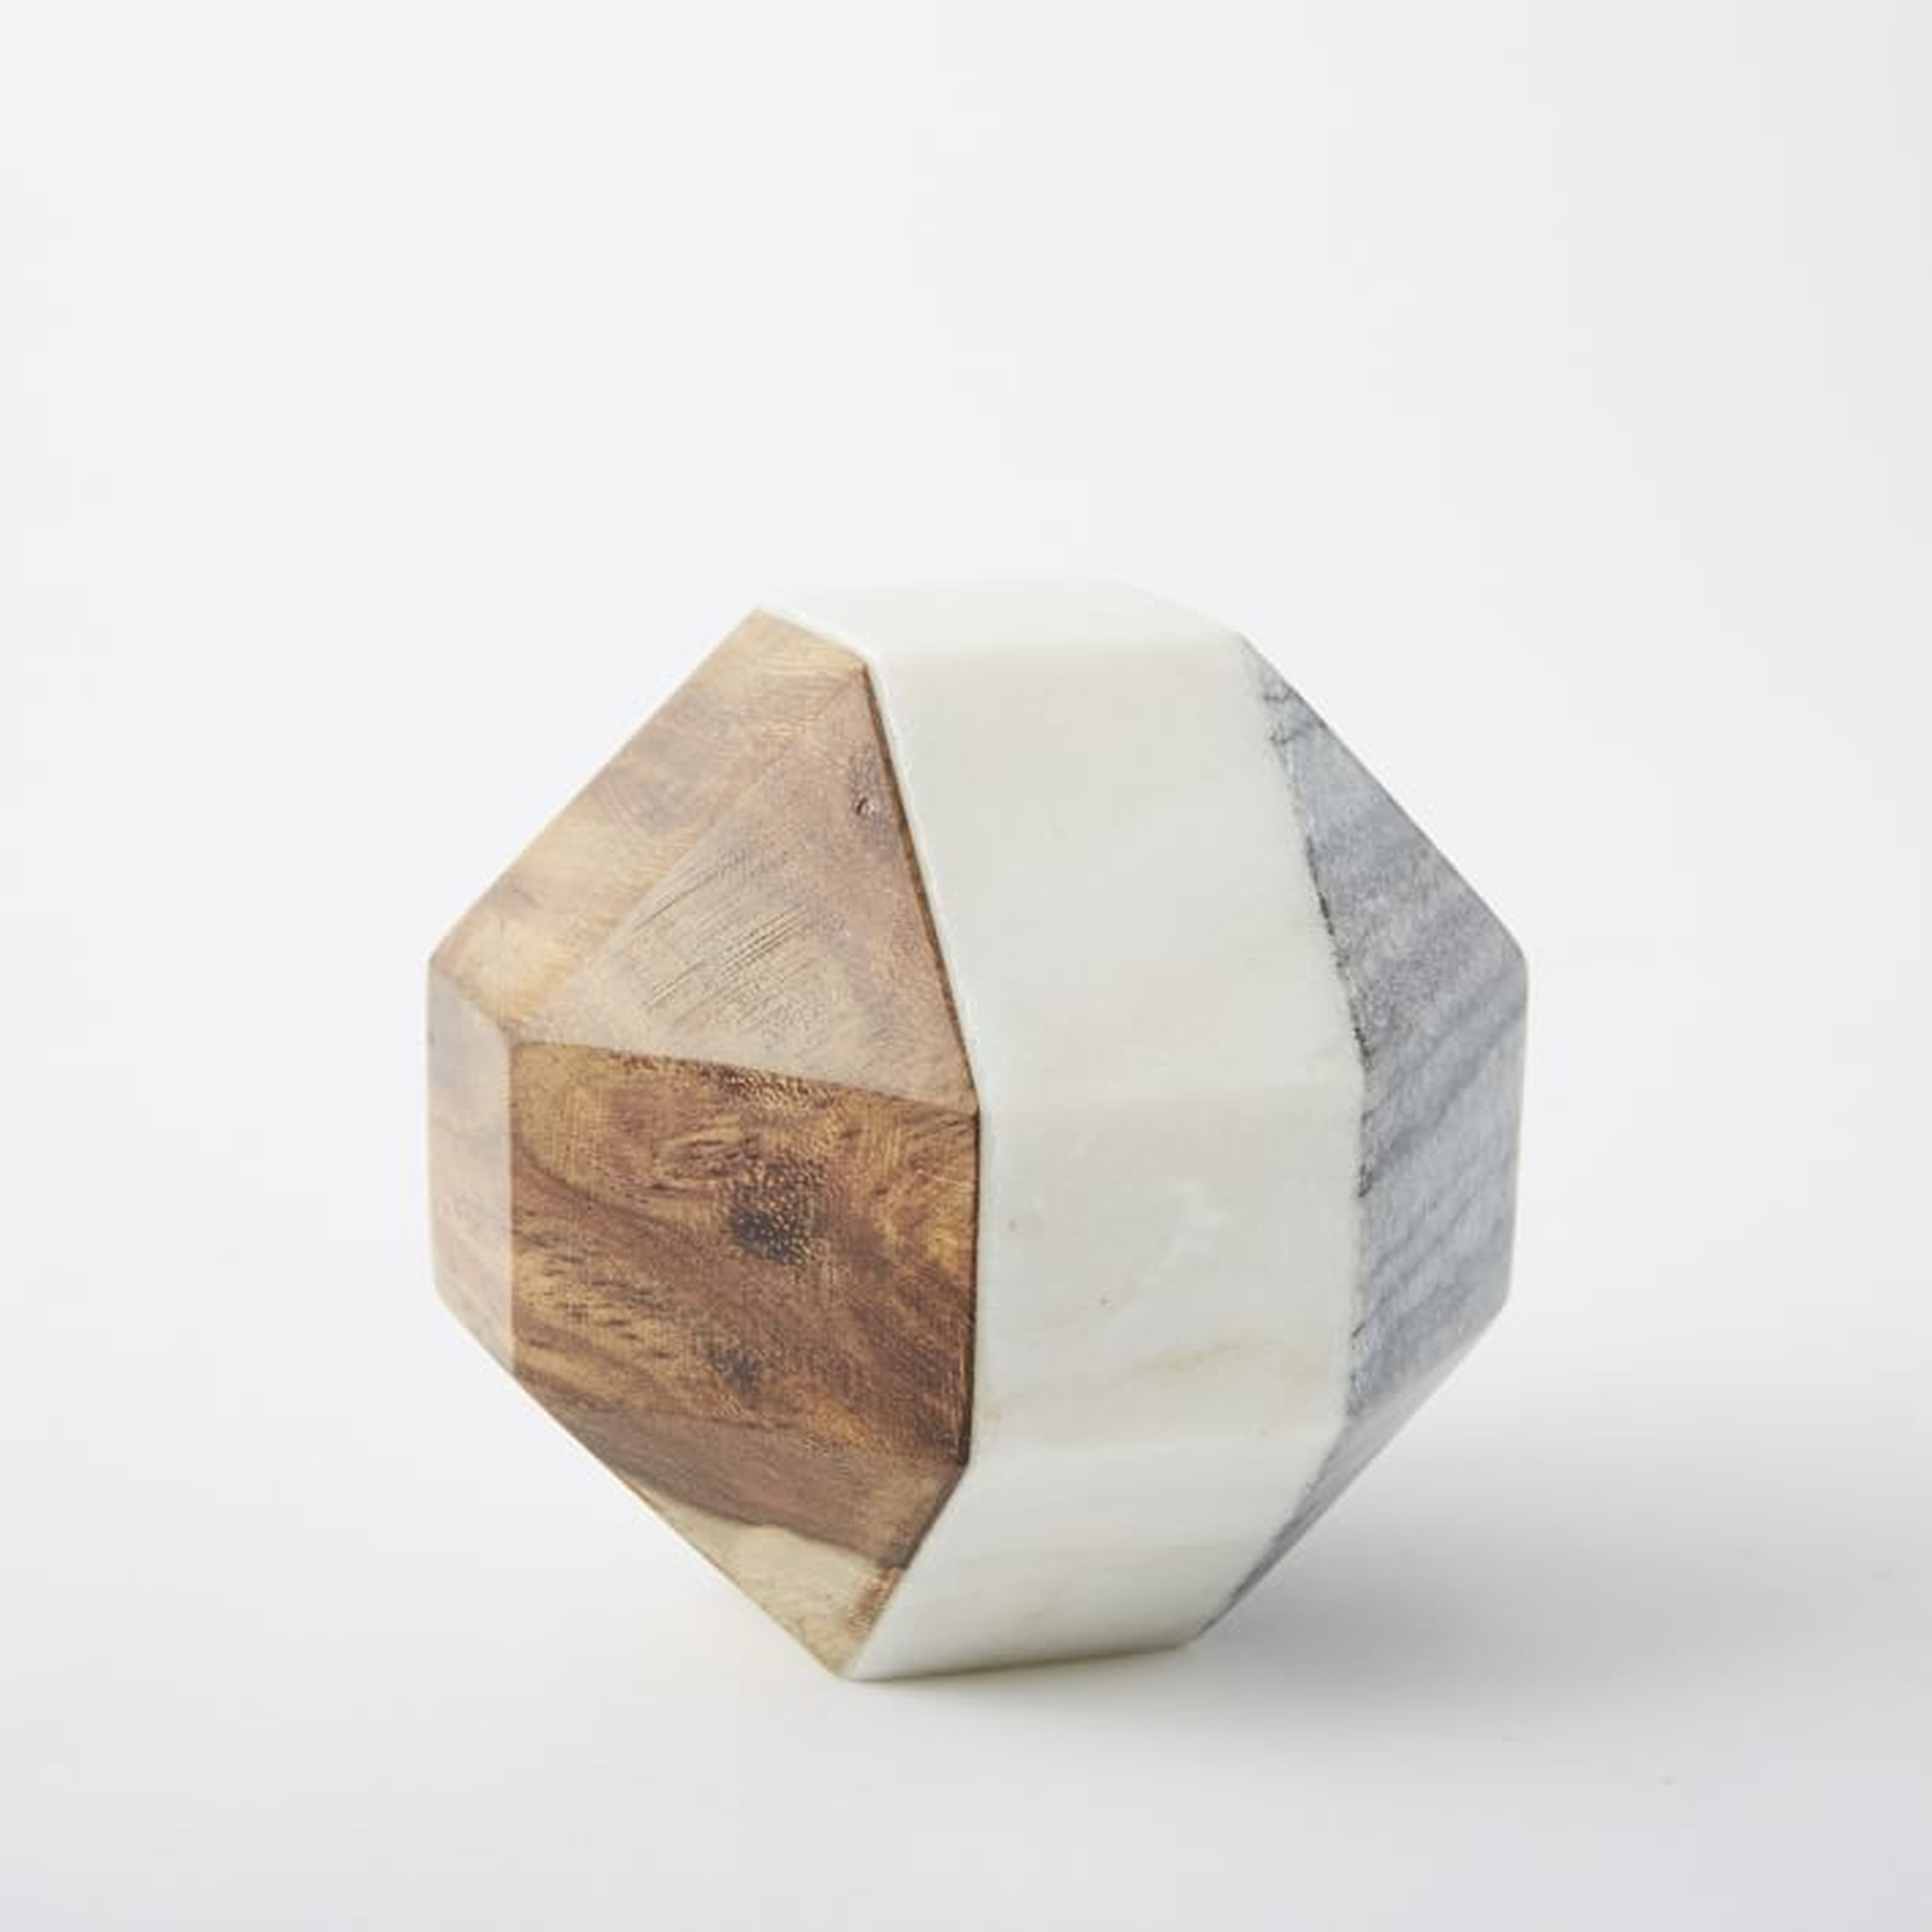 Marble & Wood Object, Small Octahedron - West Elm